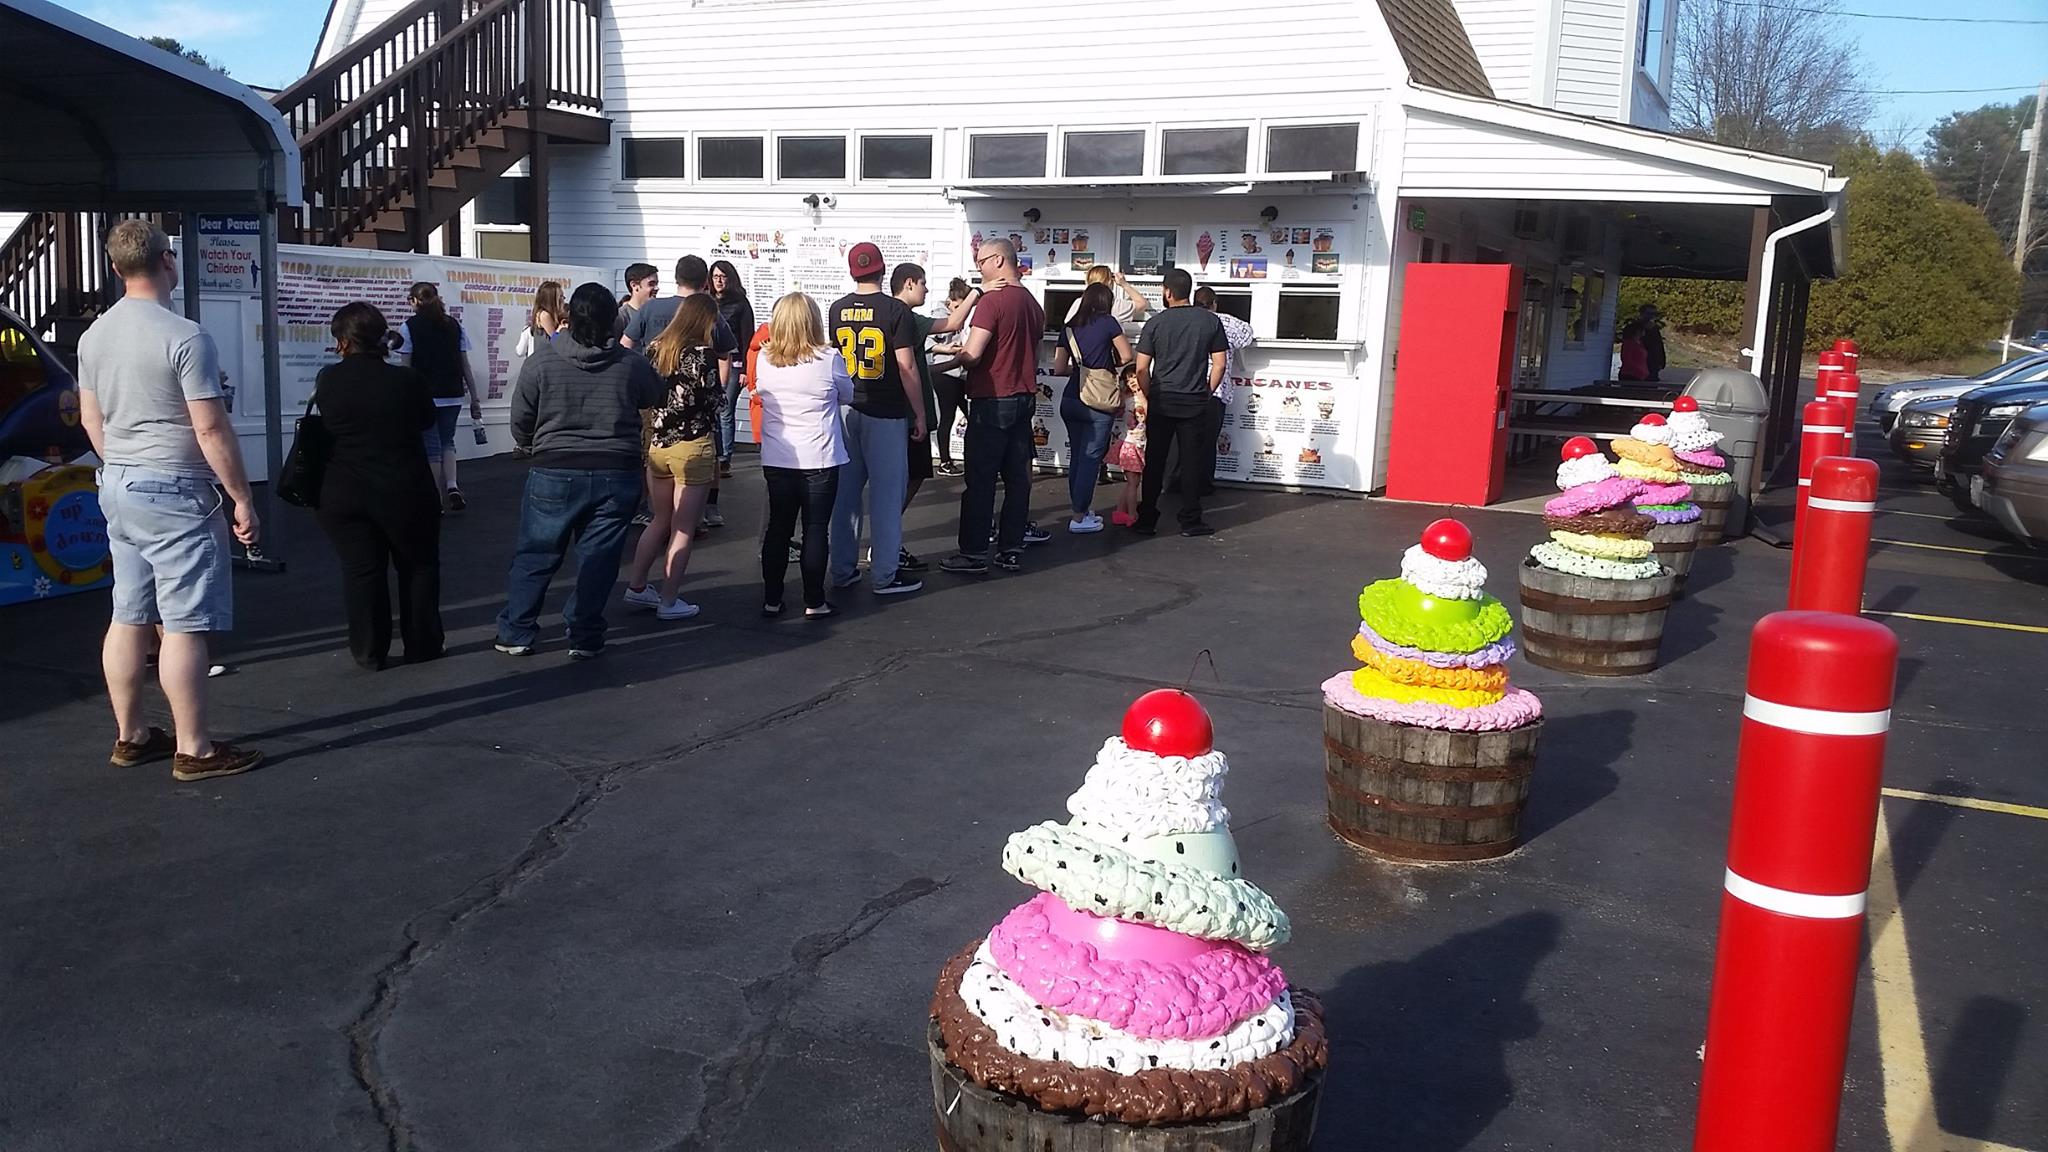 The lines form at Sandy's Chill Spot Ice Cream and Seafood in Bellingham, Mass.